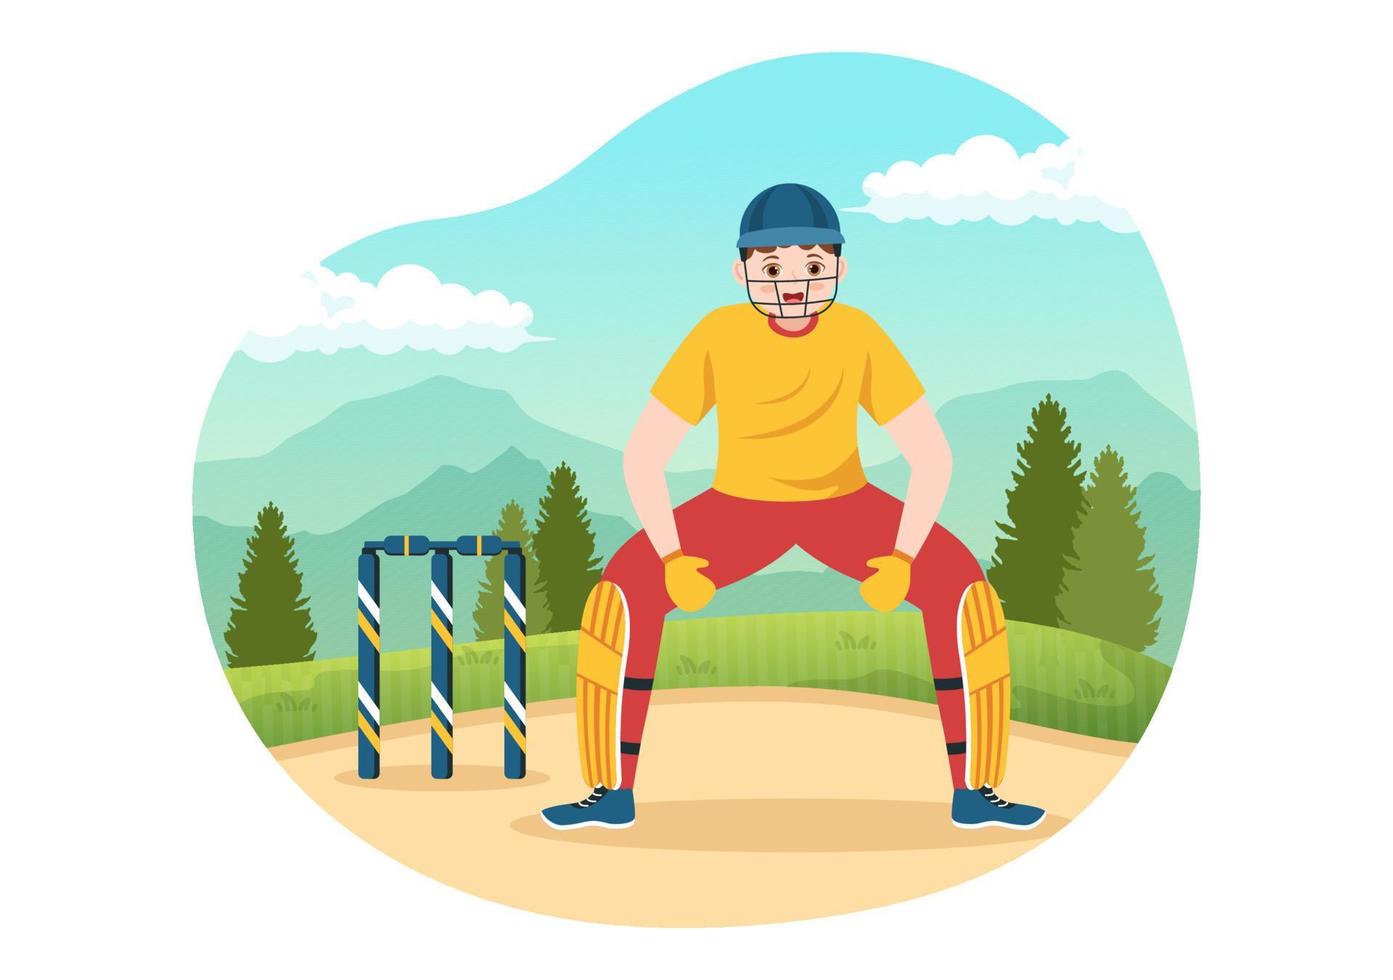 Batsman Playing Cricket Sport Illustration with Bat and Balls in the Field for Championship in Flat Cartoon Hand Drawn Templates vector